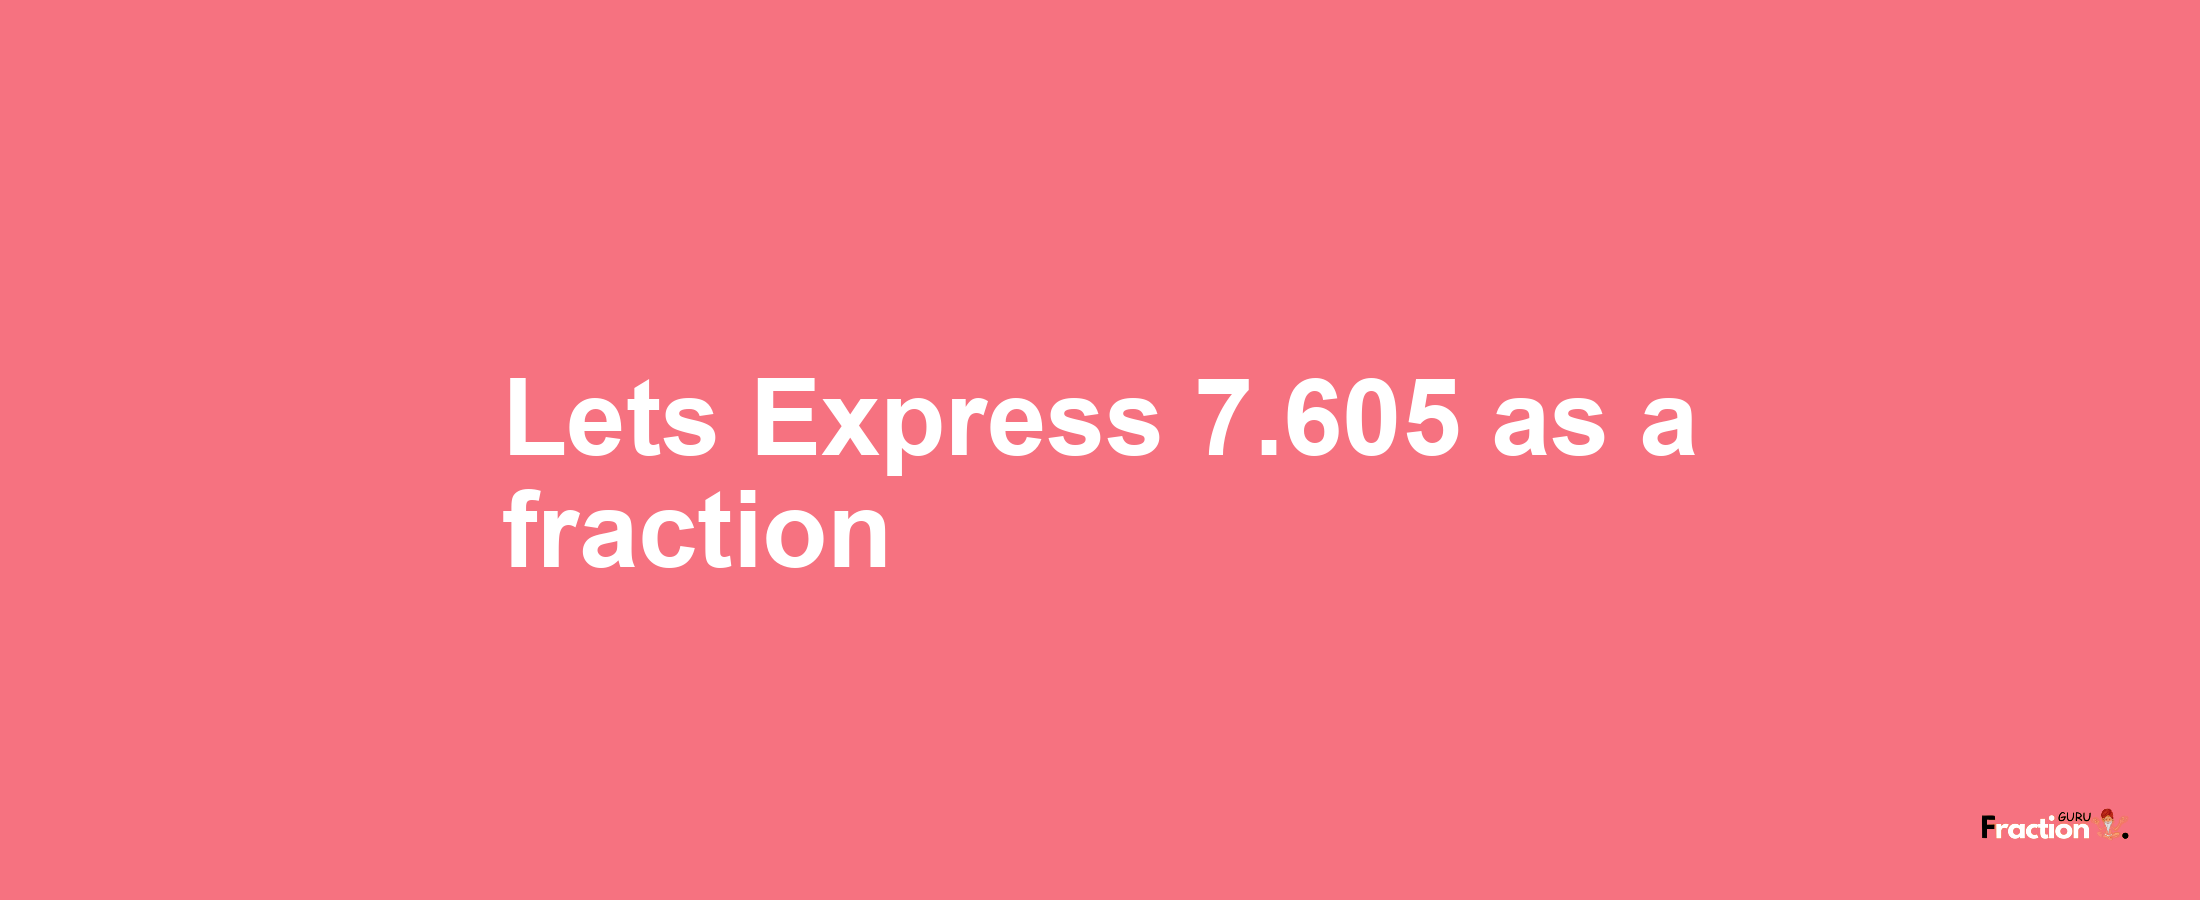 Lets Express 7.605 as afraction